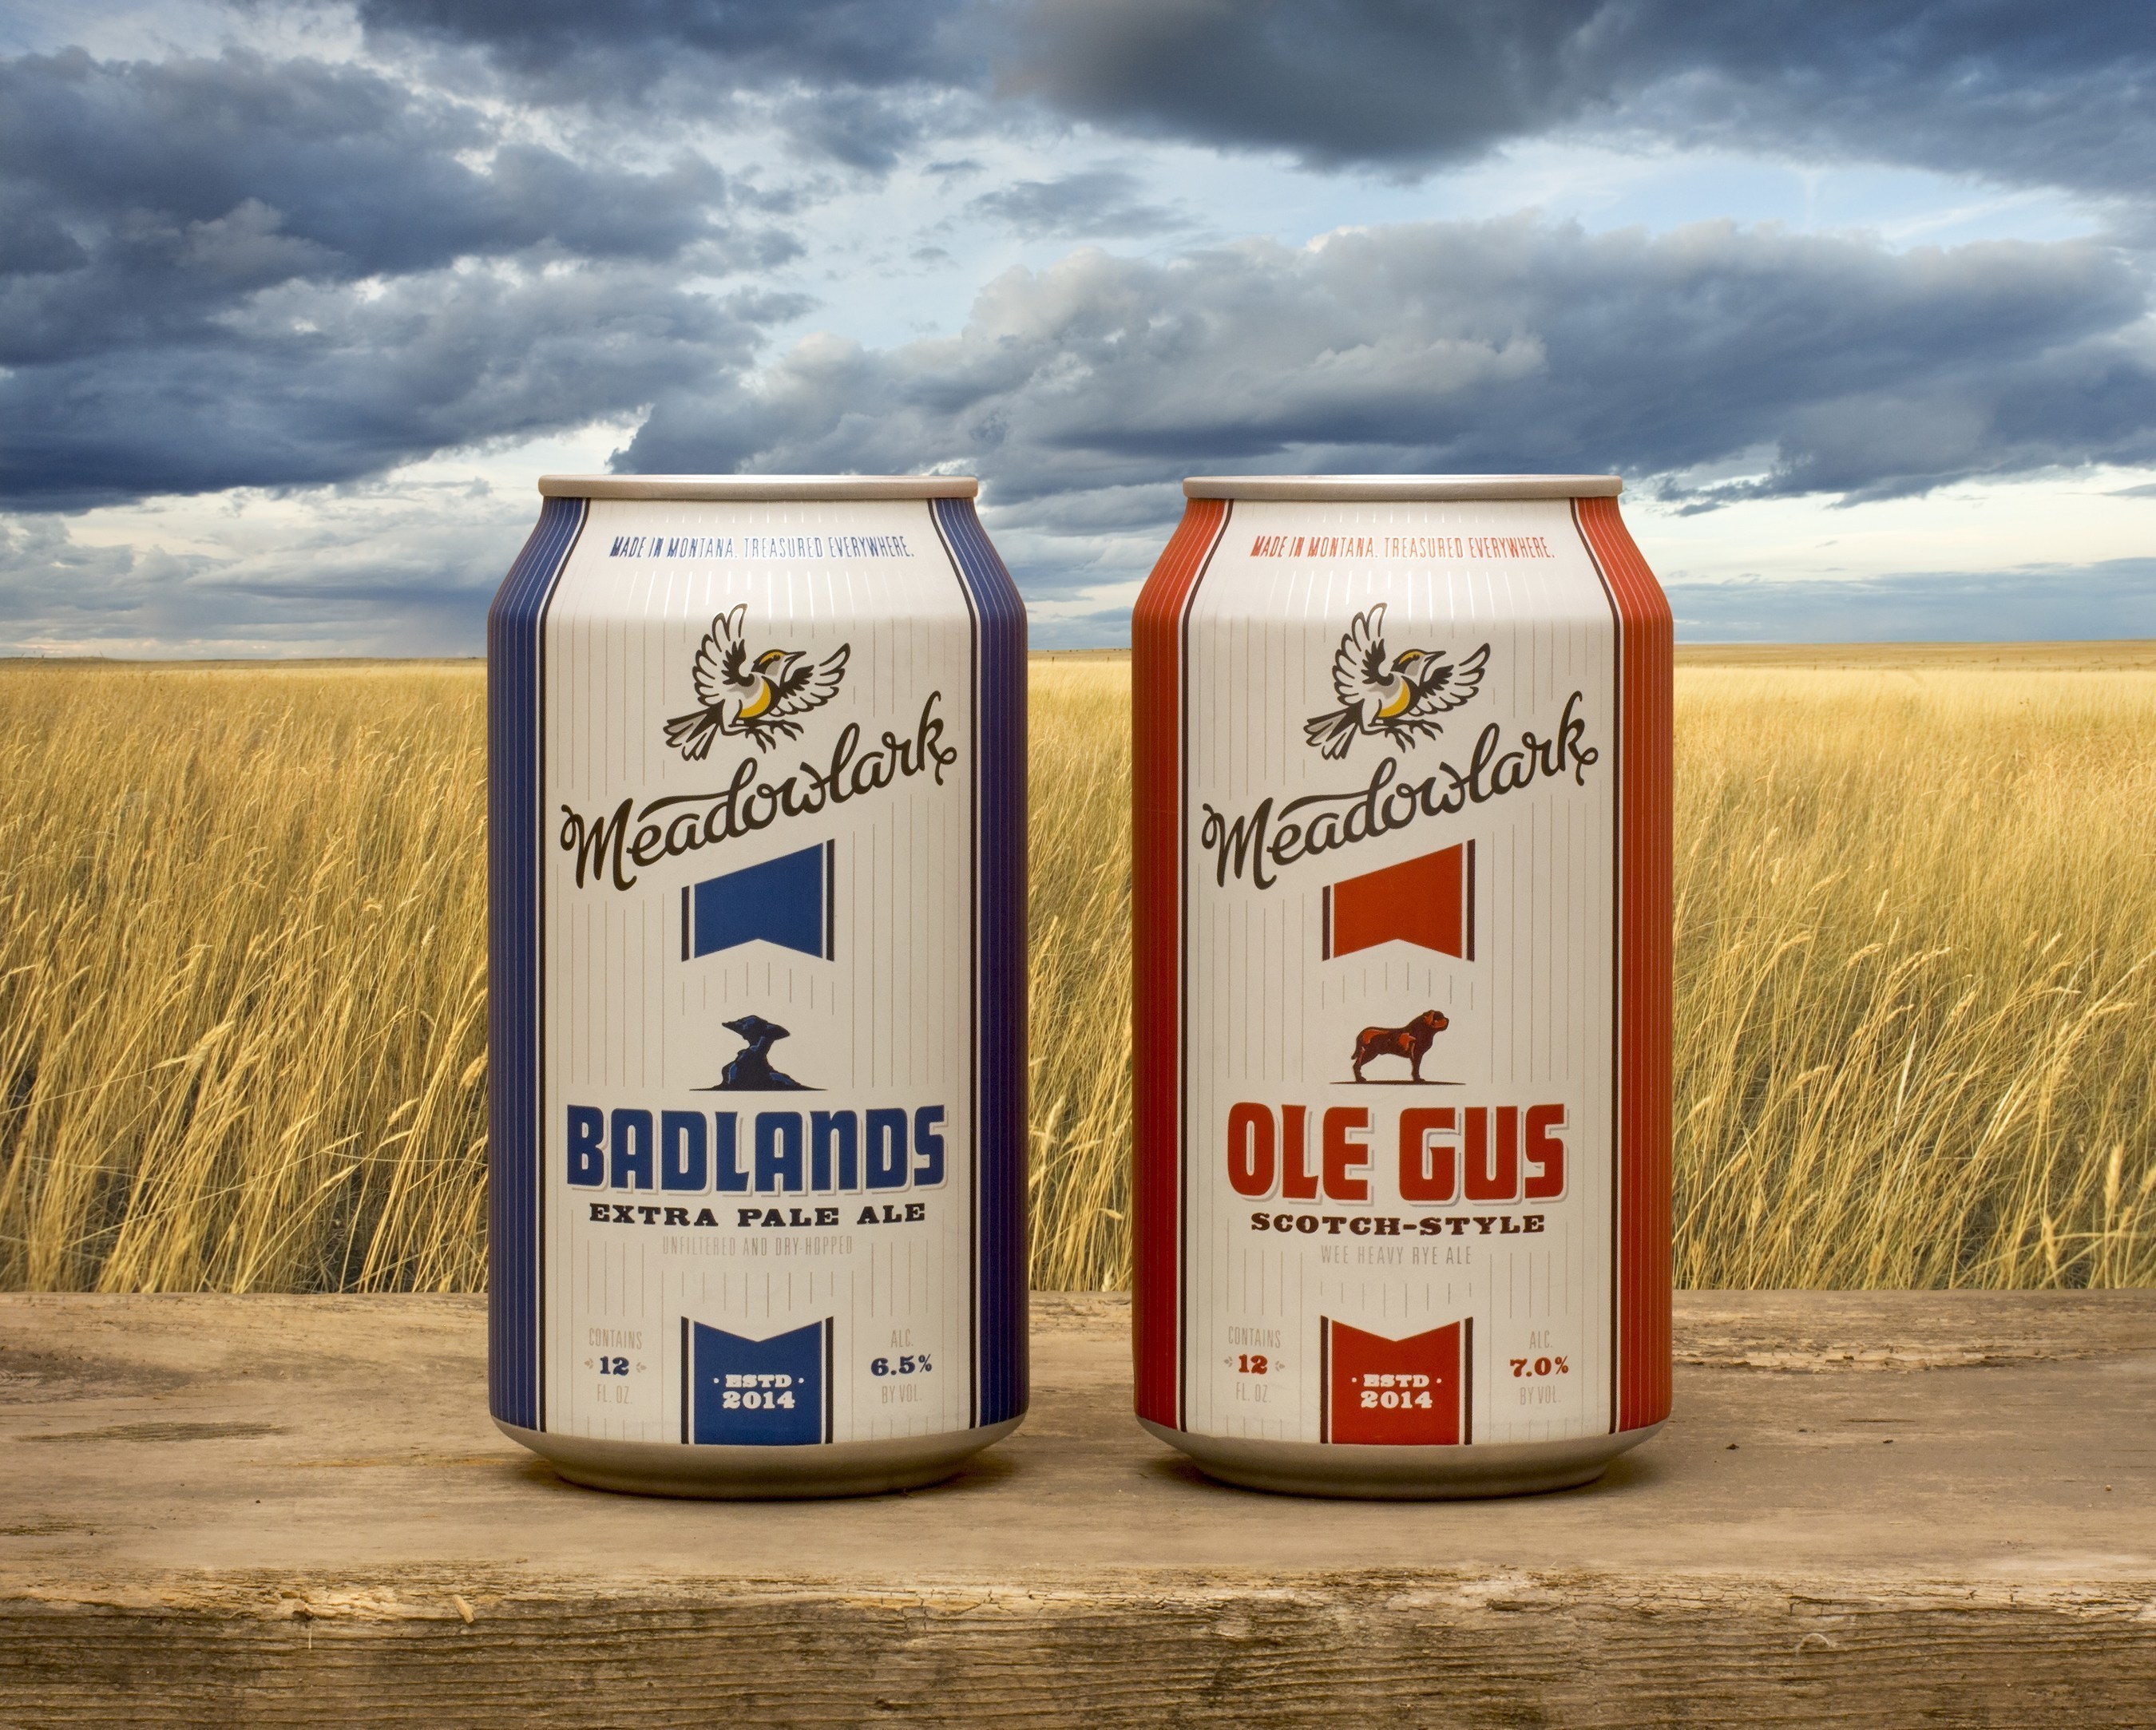 Meadowlark Brewing has launched two of its core beers in Rexam 12 oz. cans.